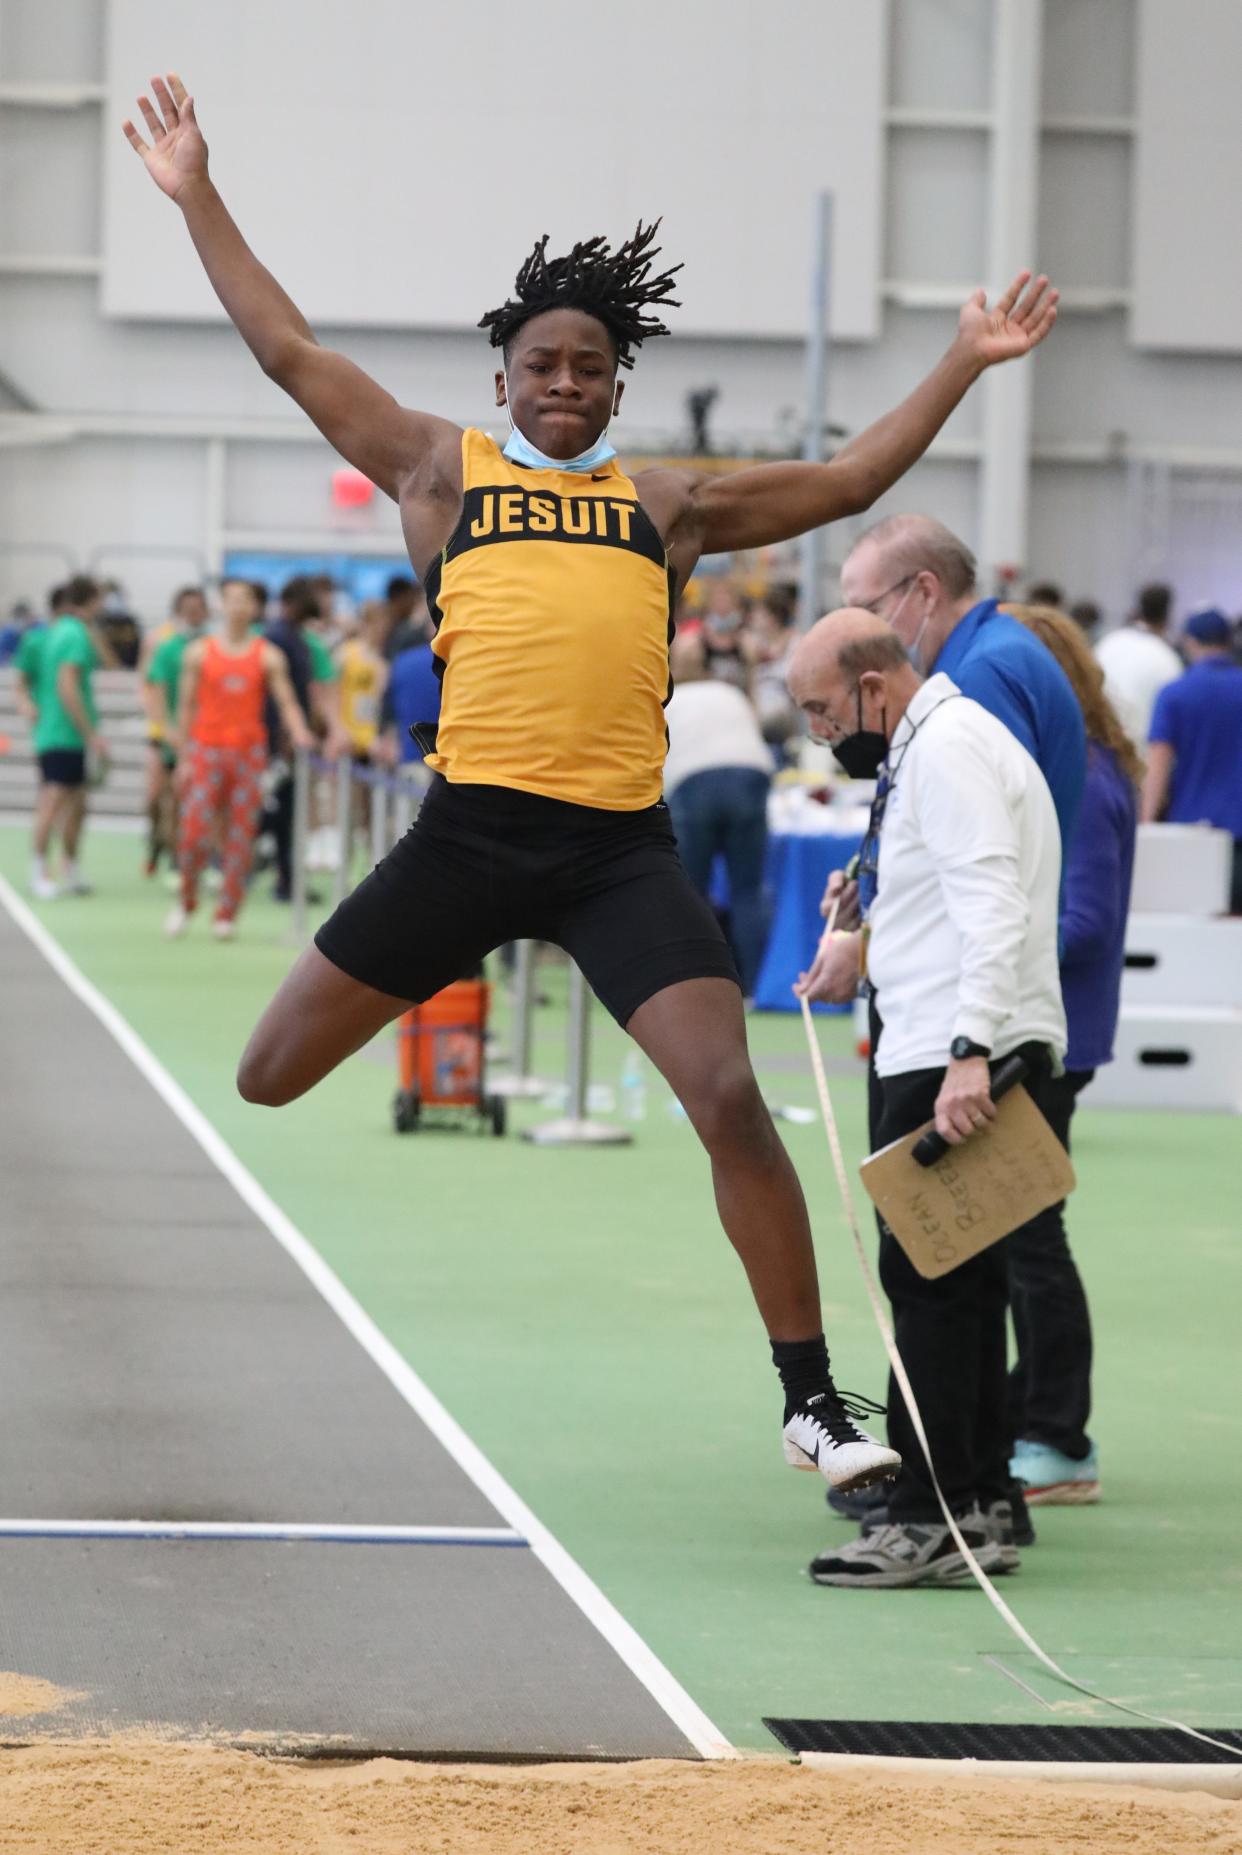 Rhoan Kaulder from McQuaid competes in the boys long jump at the NYSPHSAA Indoor Track & Field Championships at the Ocean Breeze Athletic complex in Staten Island,March 5, 2022.